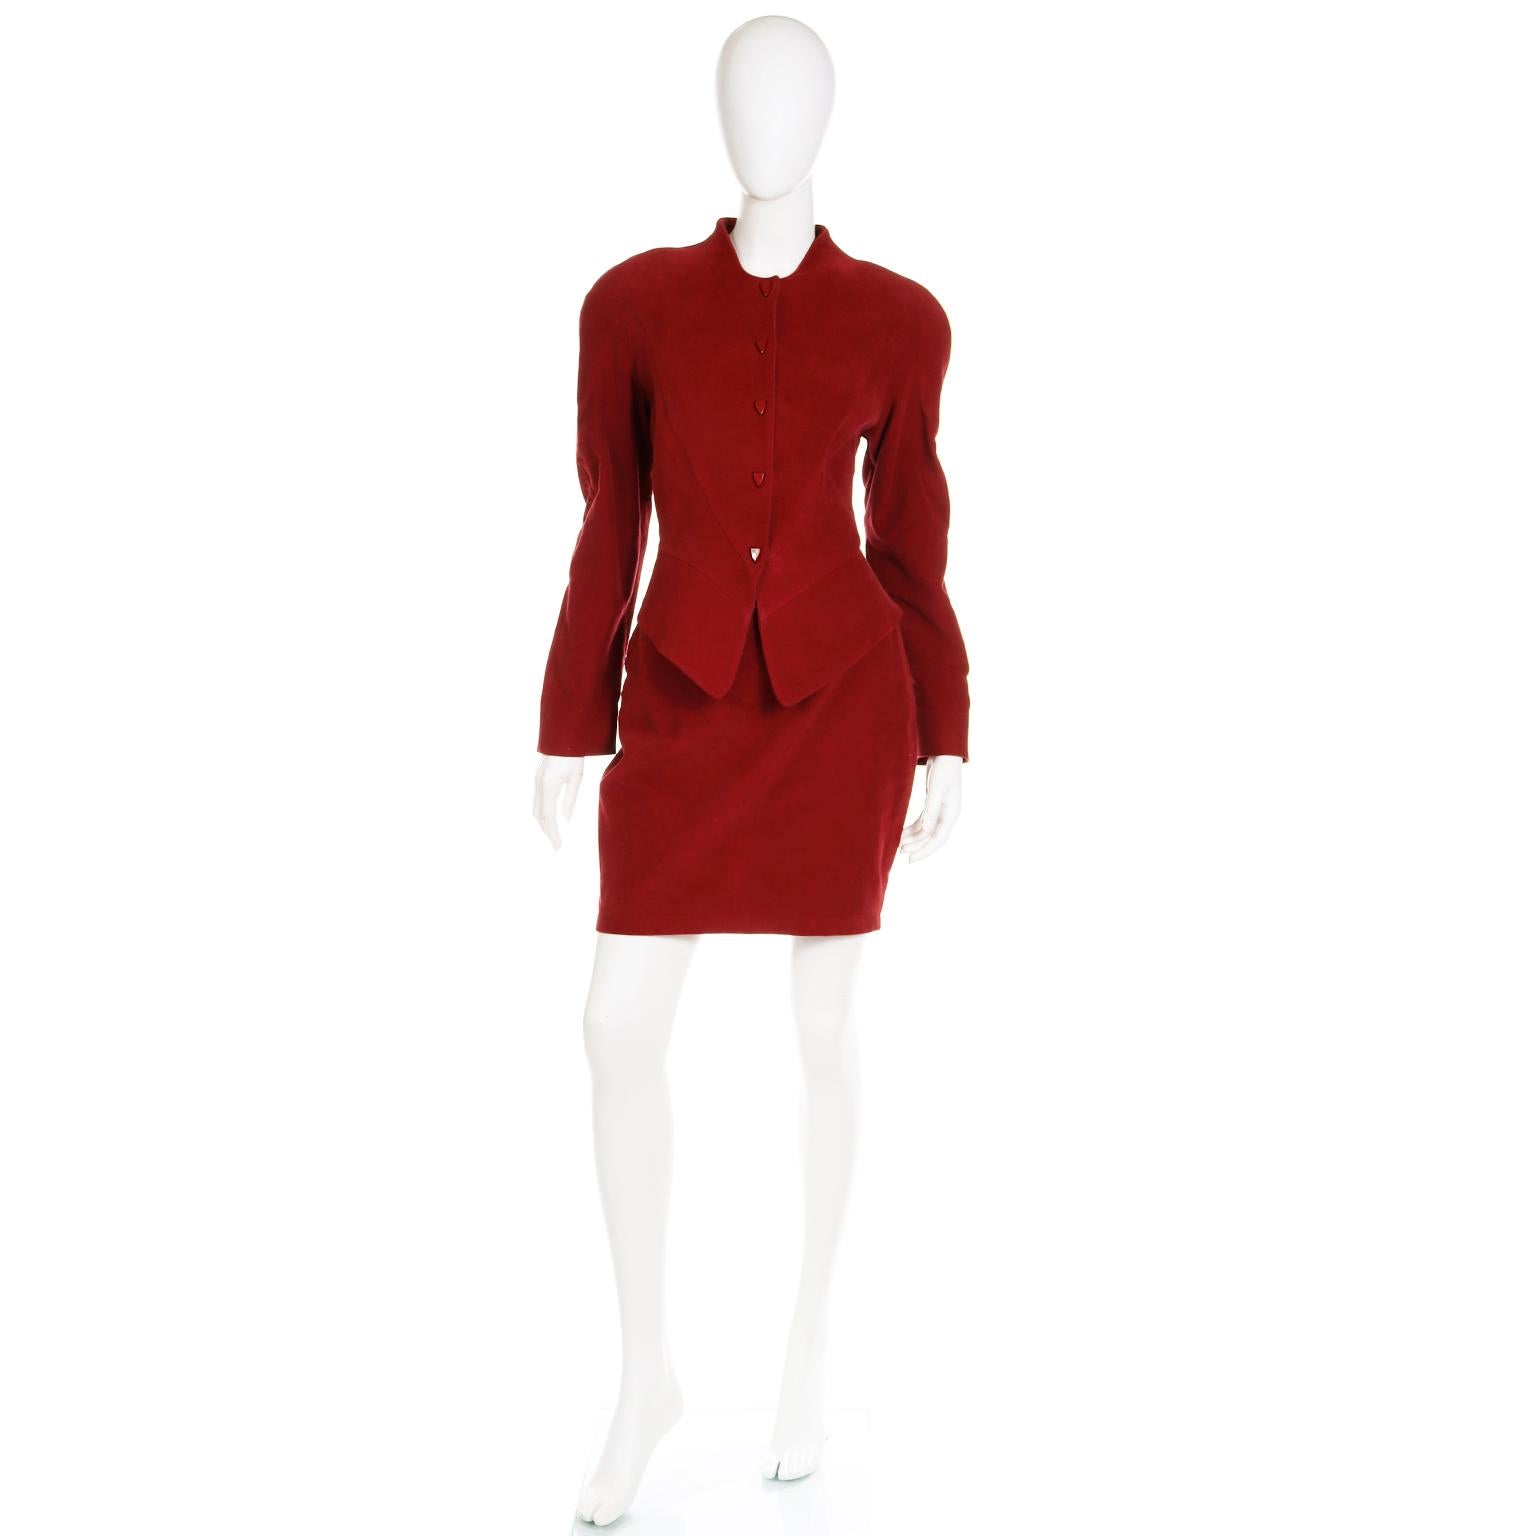 This is an unworn vintage Thierry Mugler Activ  late 1980's burgundy or dark brick red skirt and jacket suit. This outfit is deadstock with its original tags attached and it is in a sueded cotton fabric has the luxe feel of ultra suede.

The